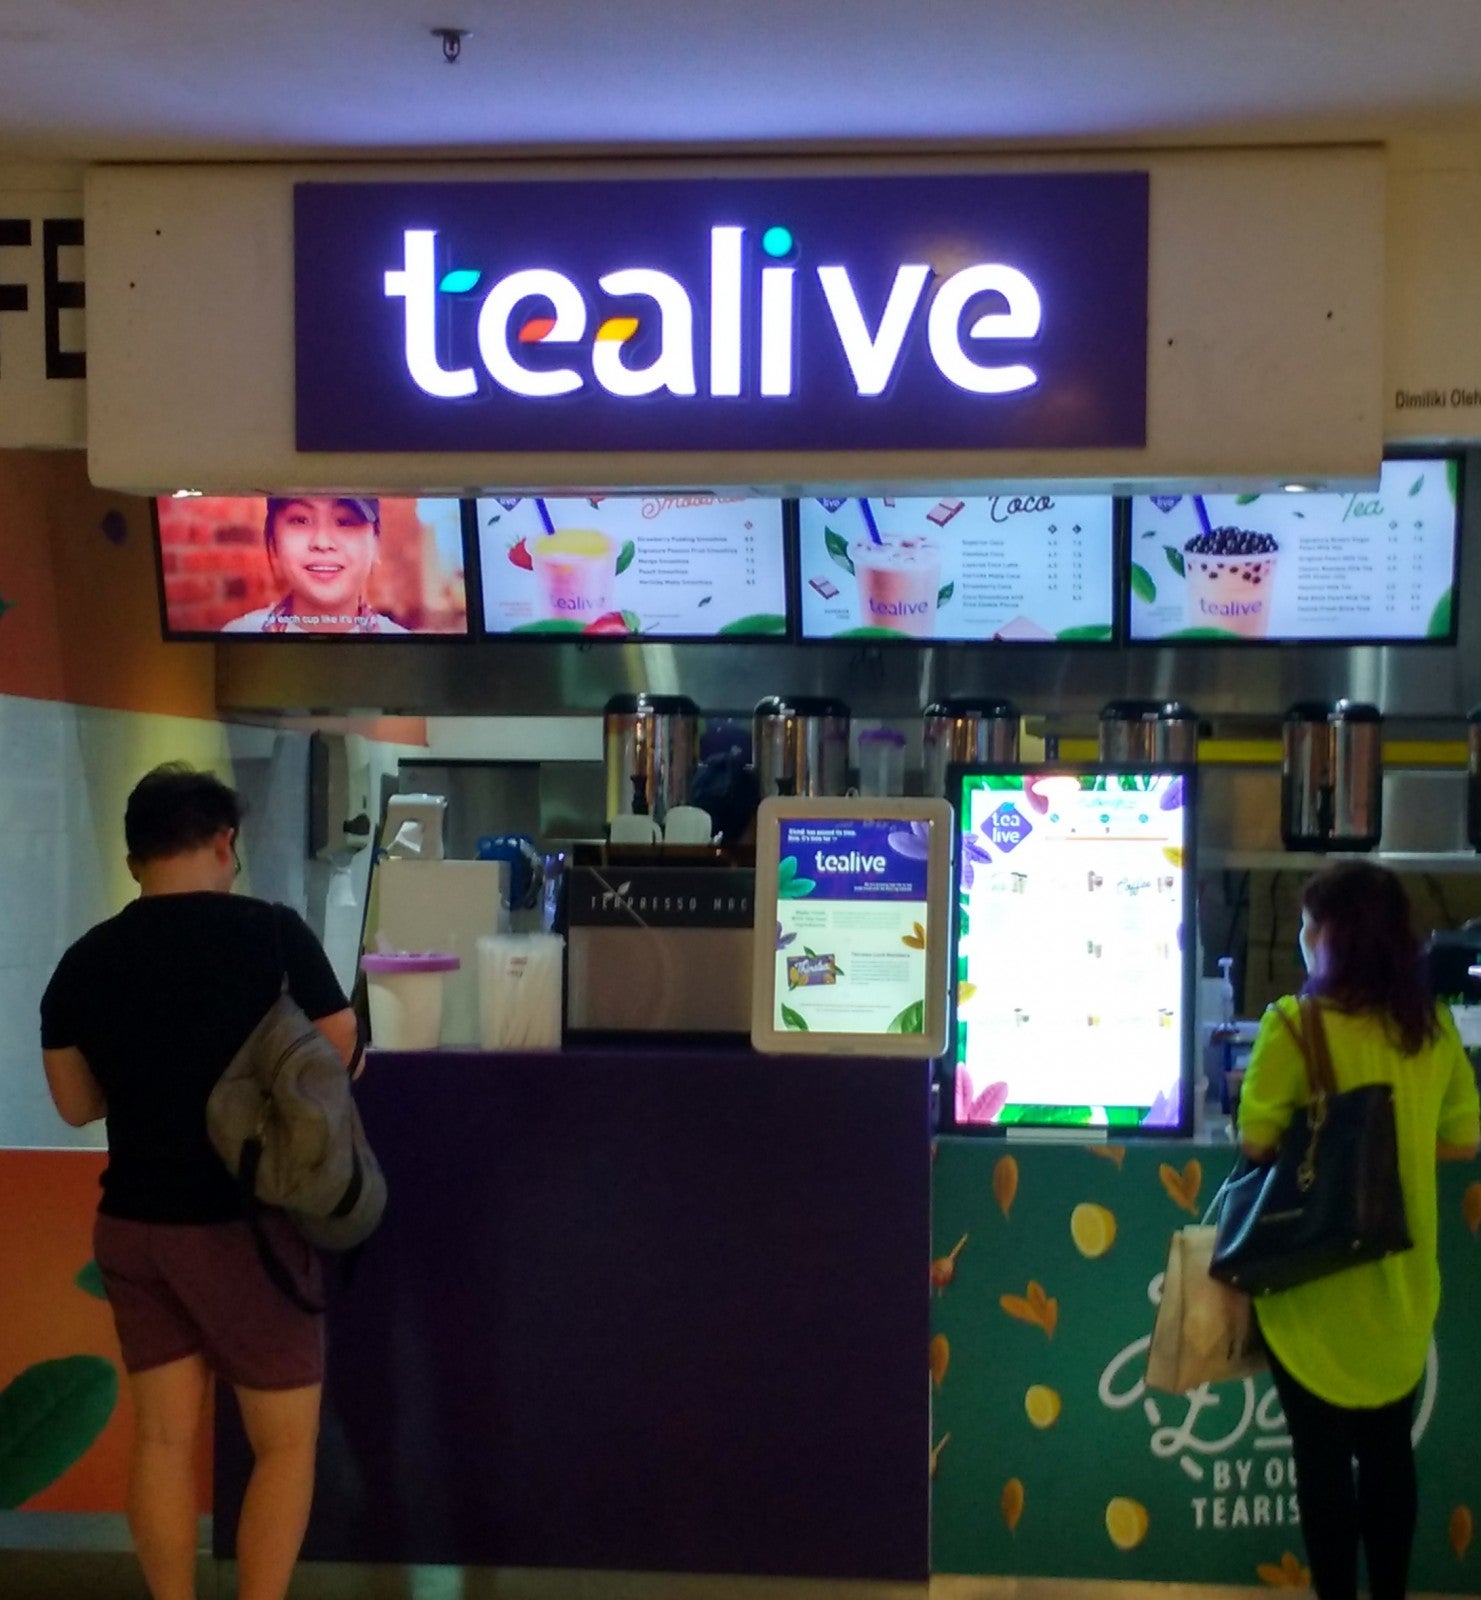 Customer Demands RM10,000 Over Lizard Incident, Tealive Says Incident May Be Fake - WORLD OF BUZZ